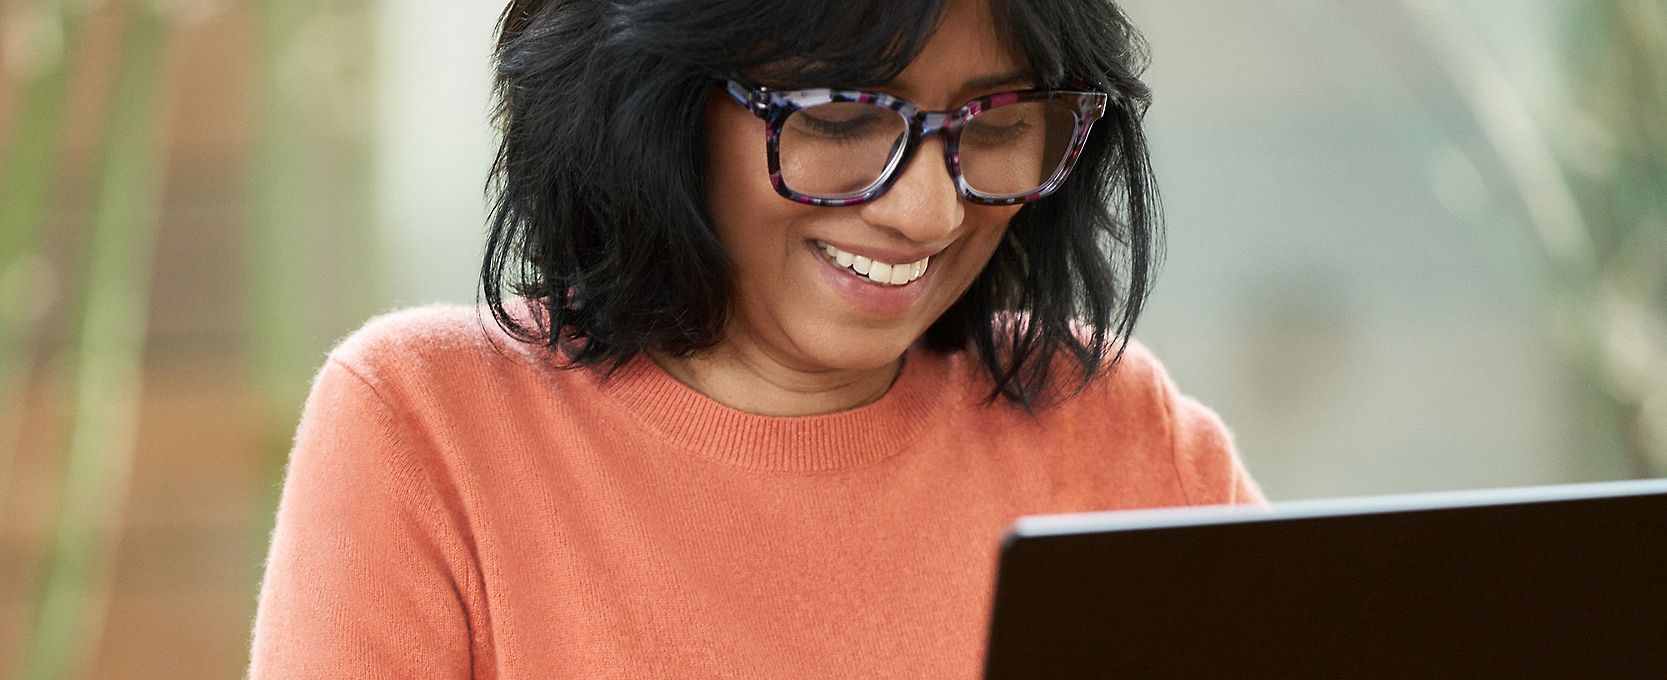 A person smiling and typing on a laptop